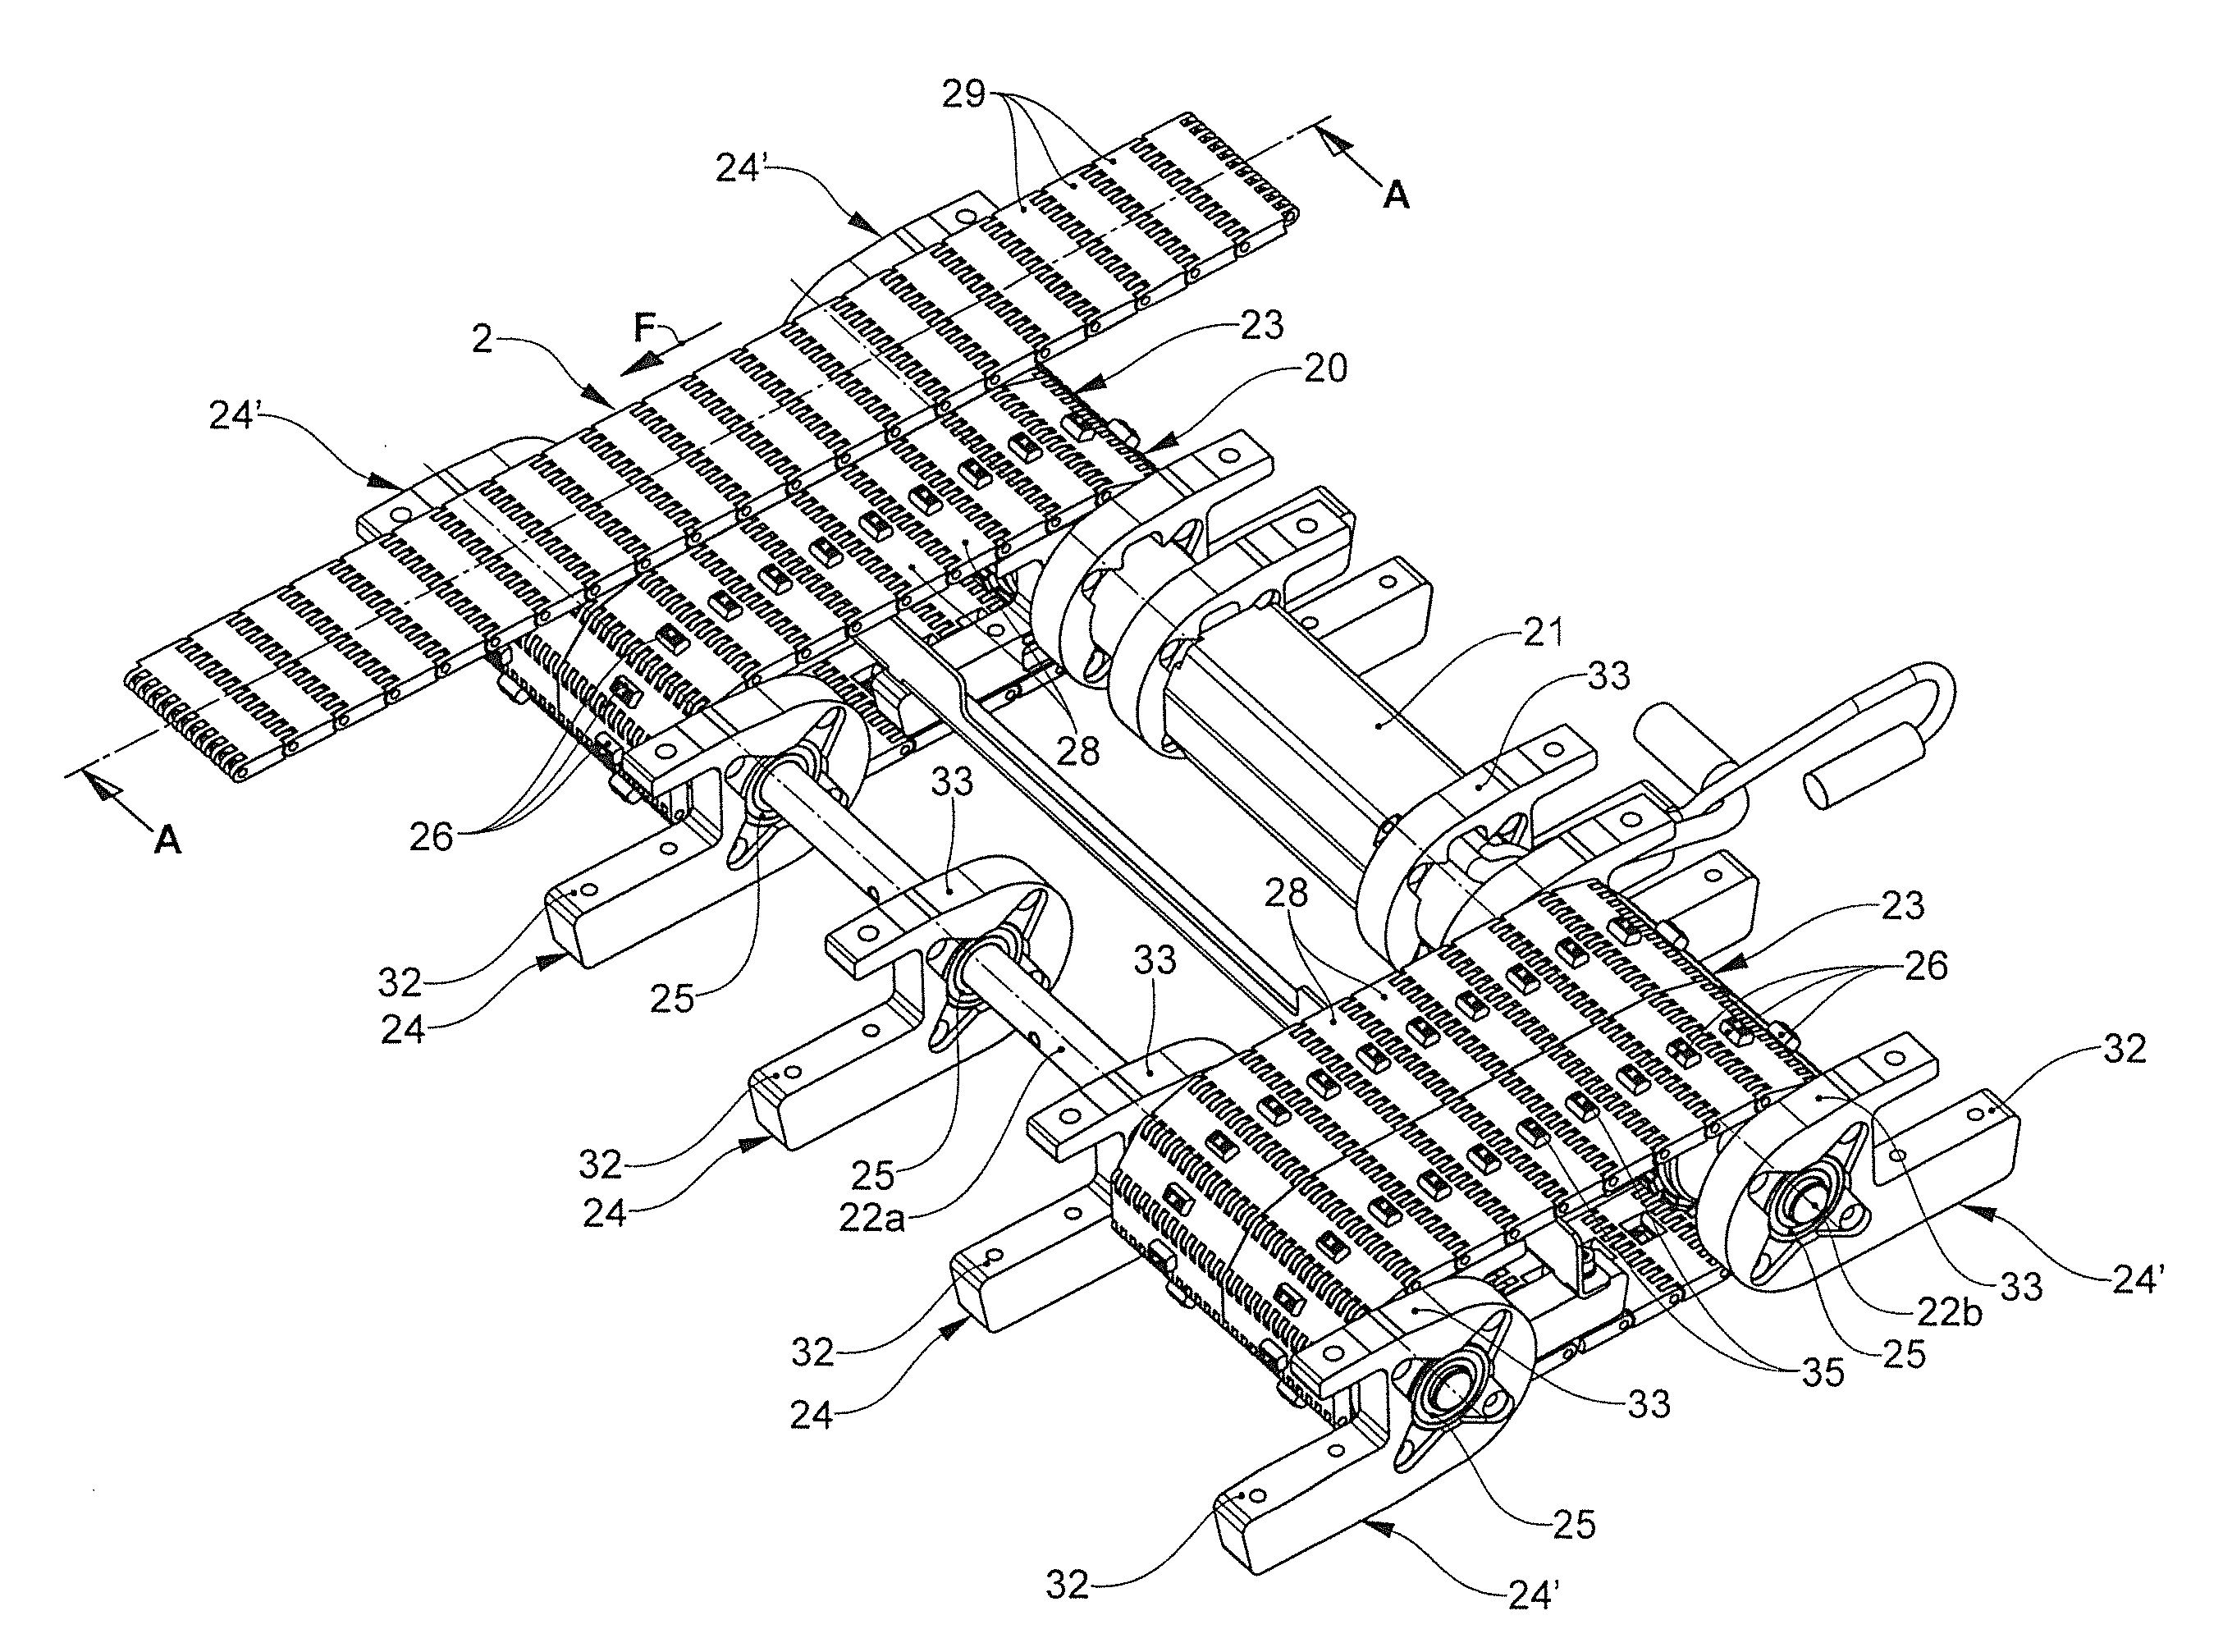 Conveying device with an extensively extended conveying element